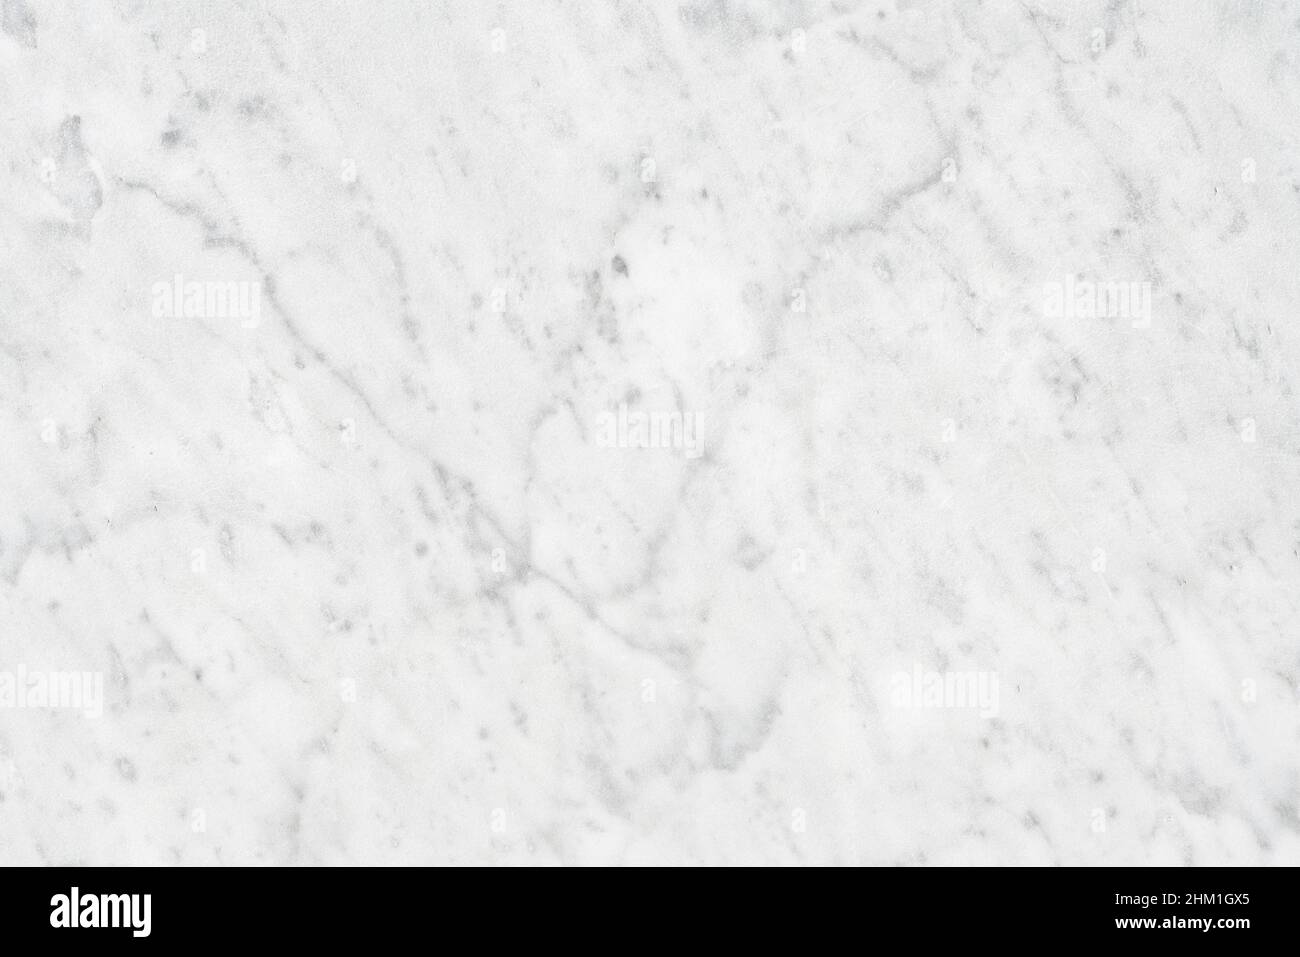 White Carrara Marble texture, background or pattern for bathroom or kitchen white countertop. High resolution. Stock Photo